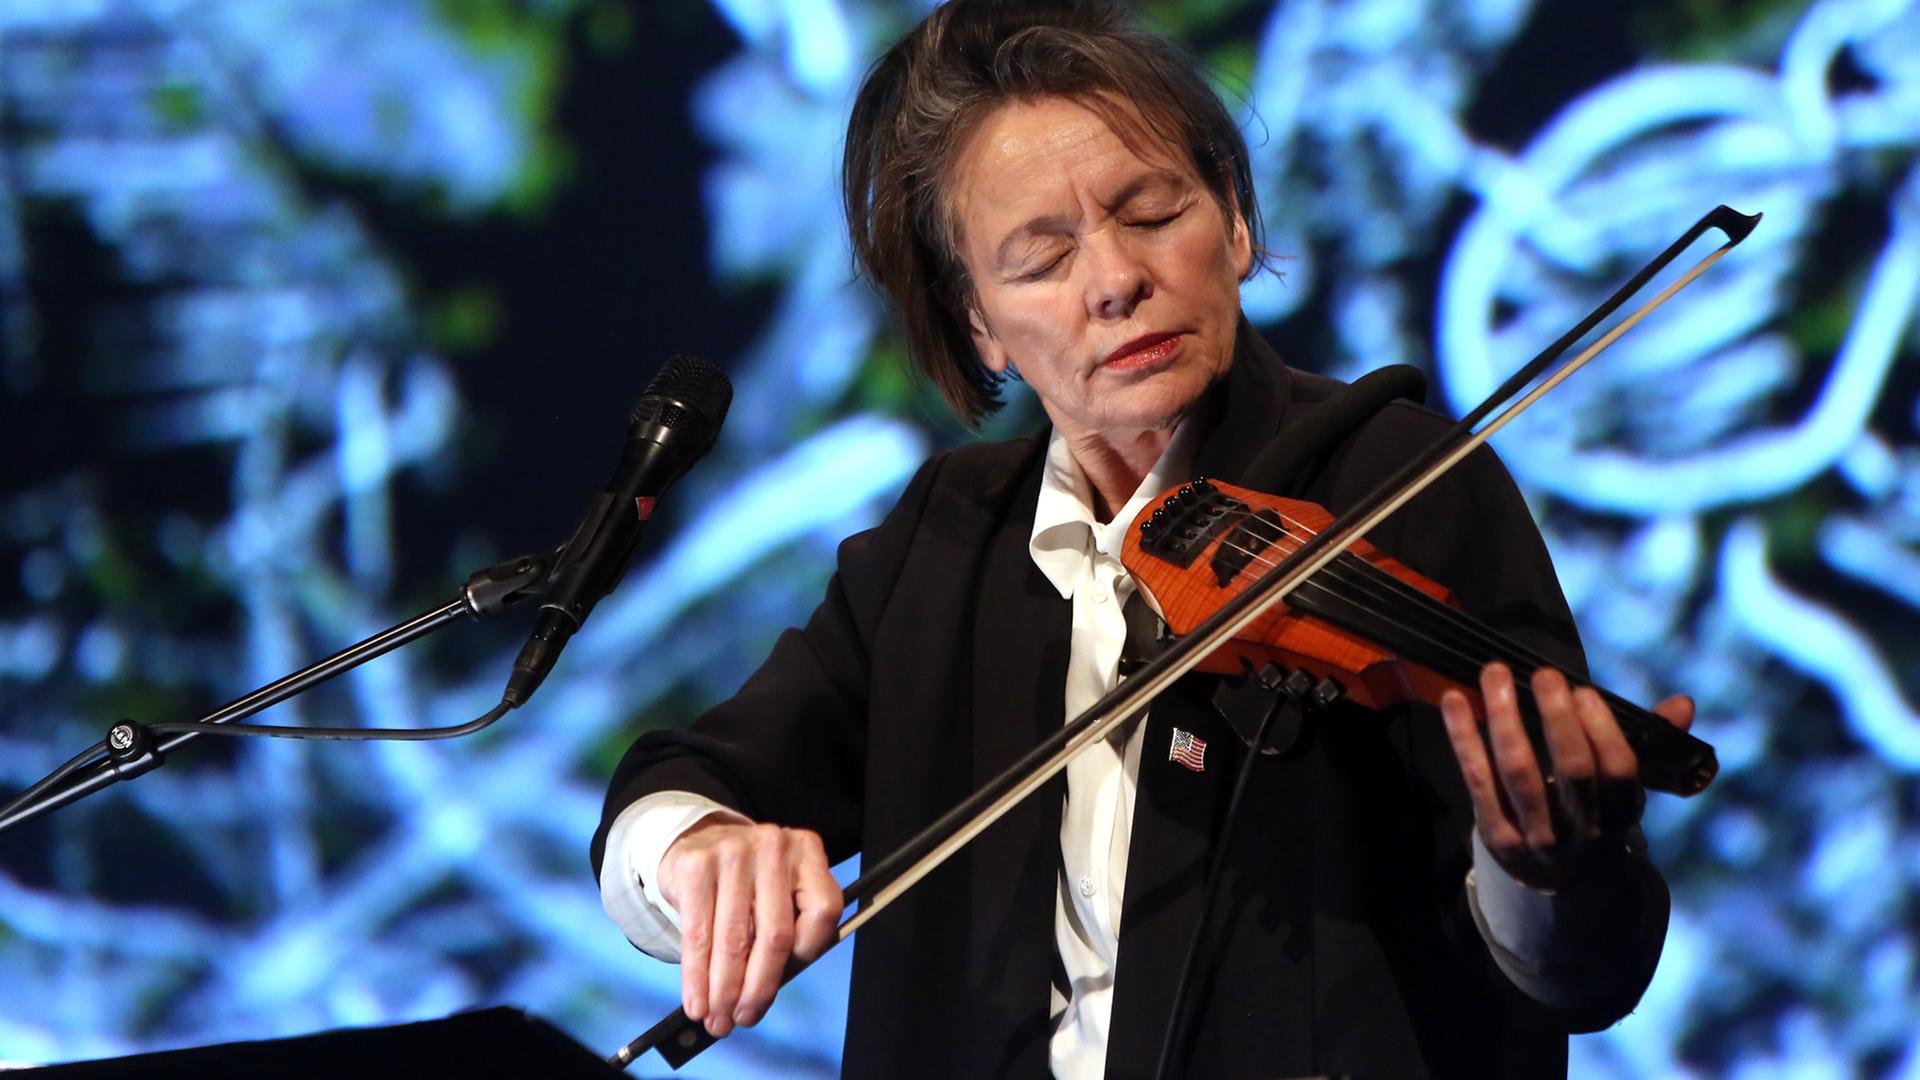 Laurie Anderson während der Performance "The Language of the Future" bei der Transmediale 2017